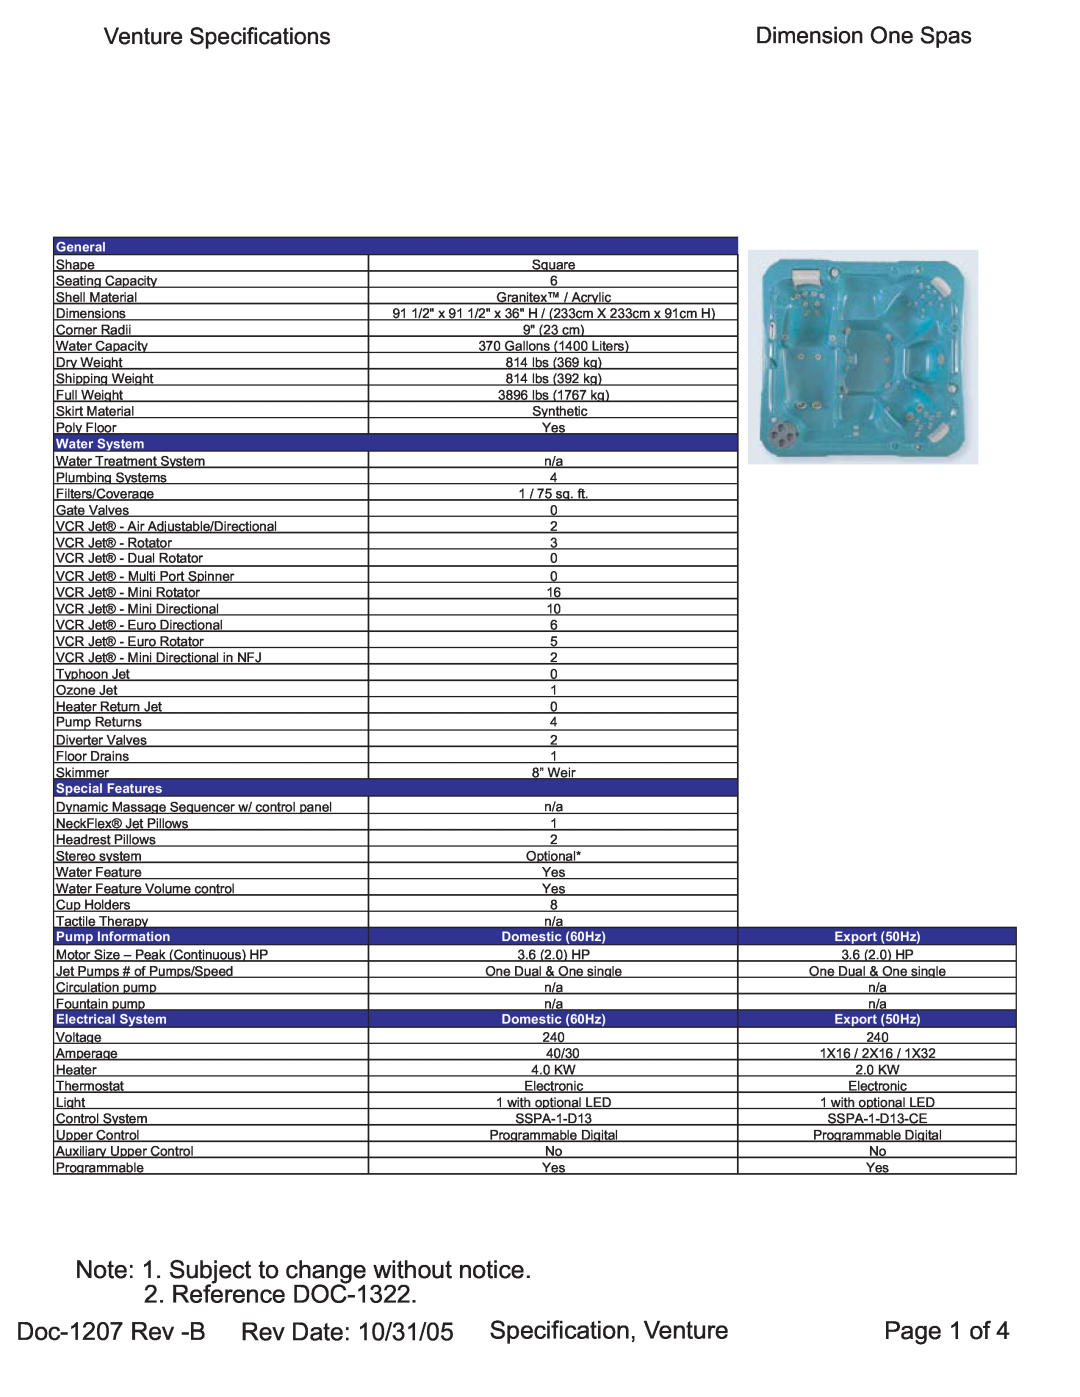 Dimension One Spas Venture specifications Page 1 of, General, Water System, Special Features, Pump Information 